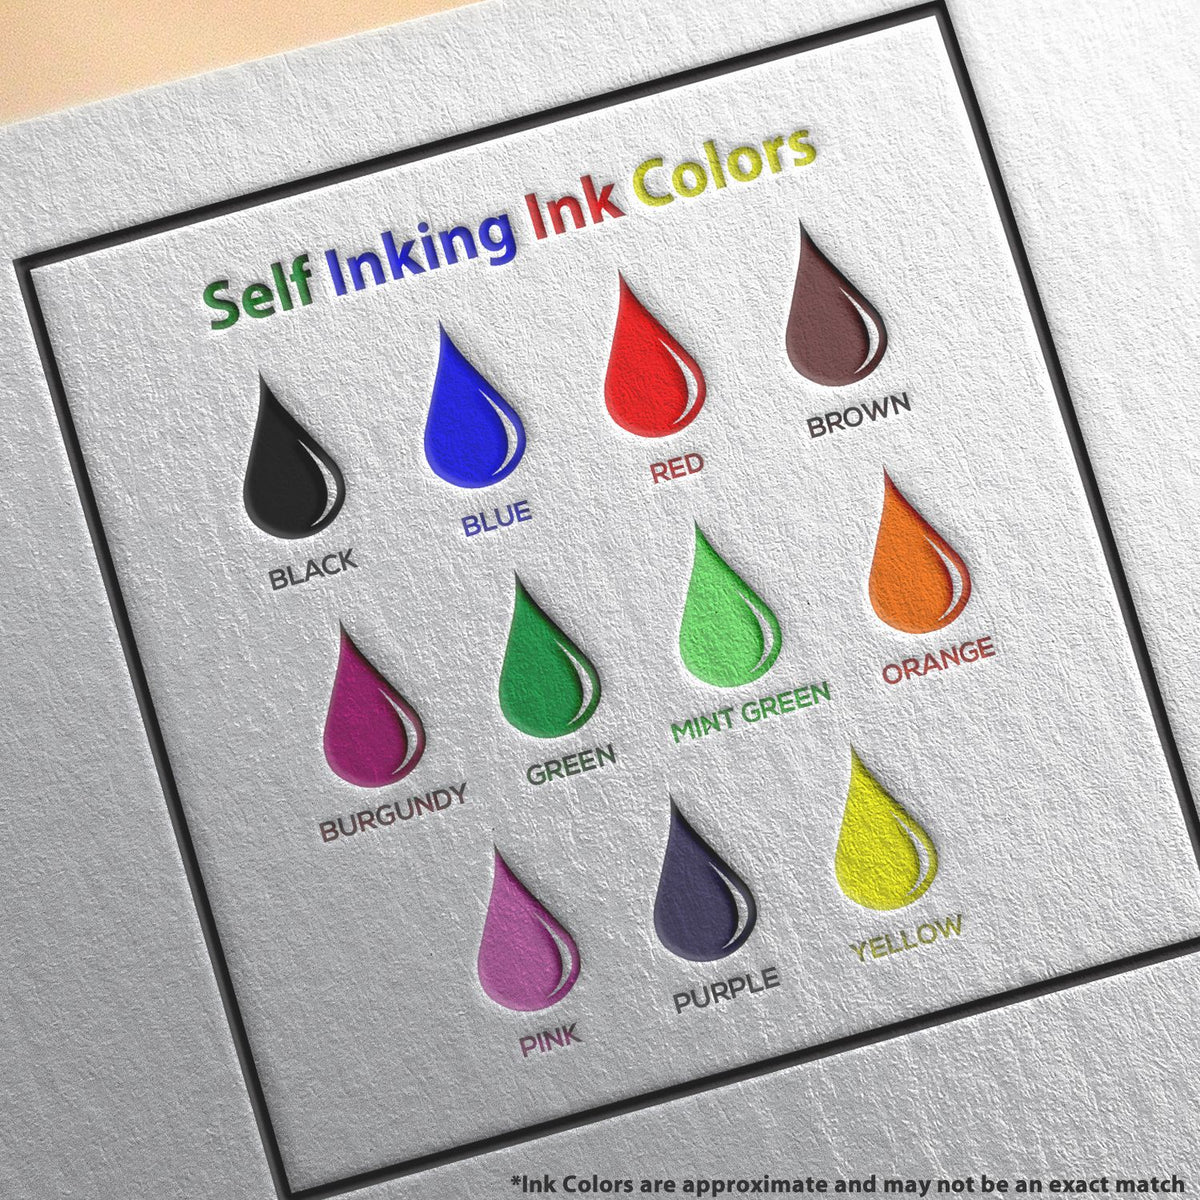 A picture showing the different ink colors or hues available for the Self-Inking Alaska Geologist Stamp